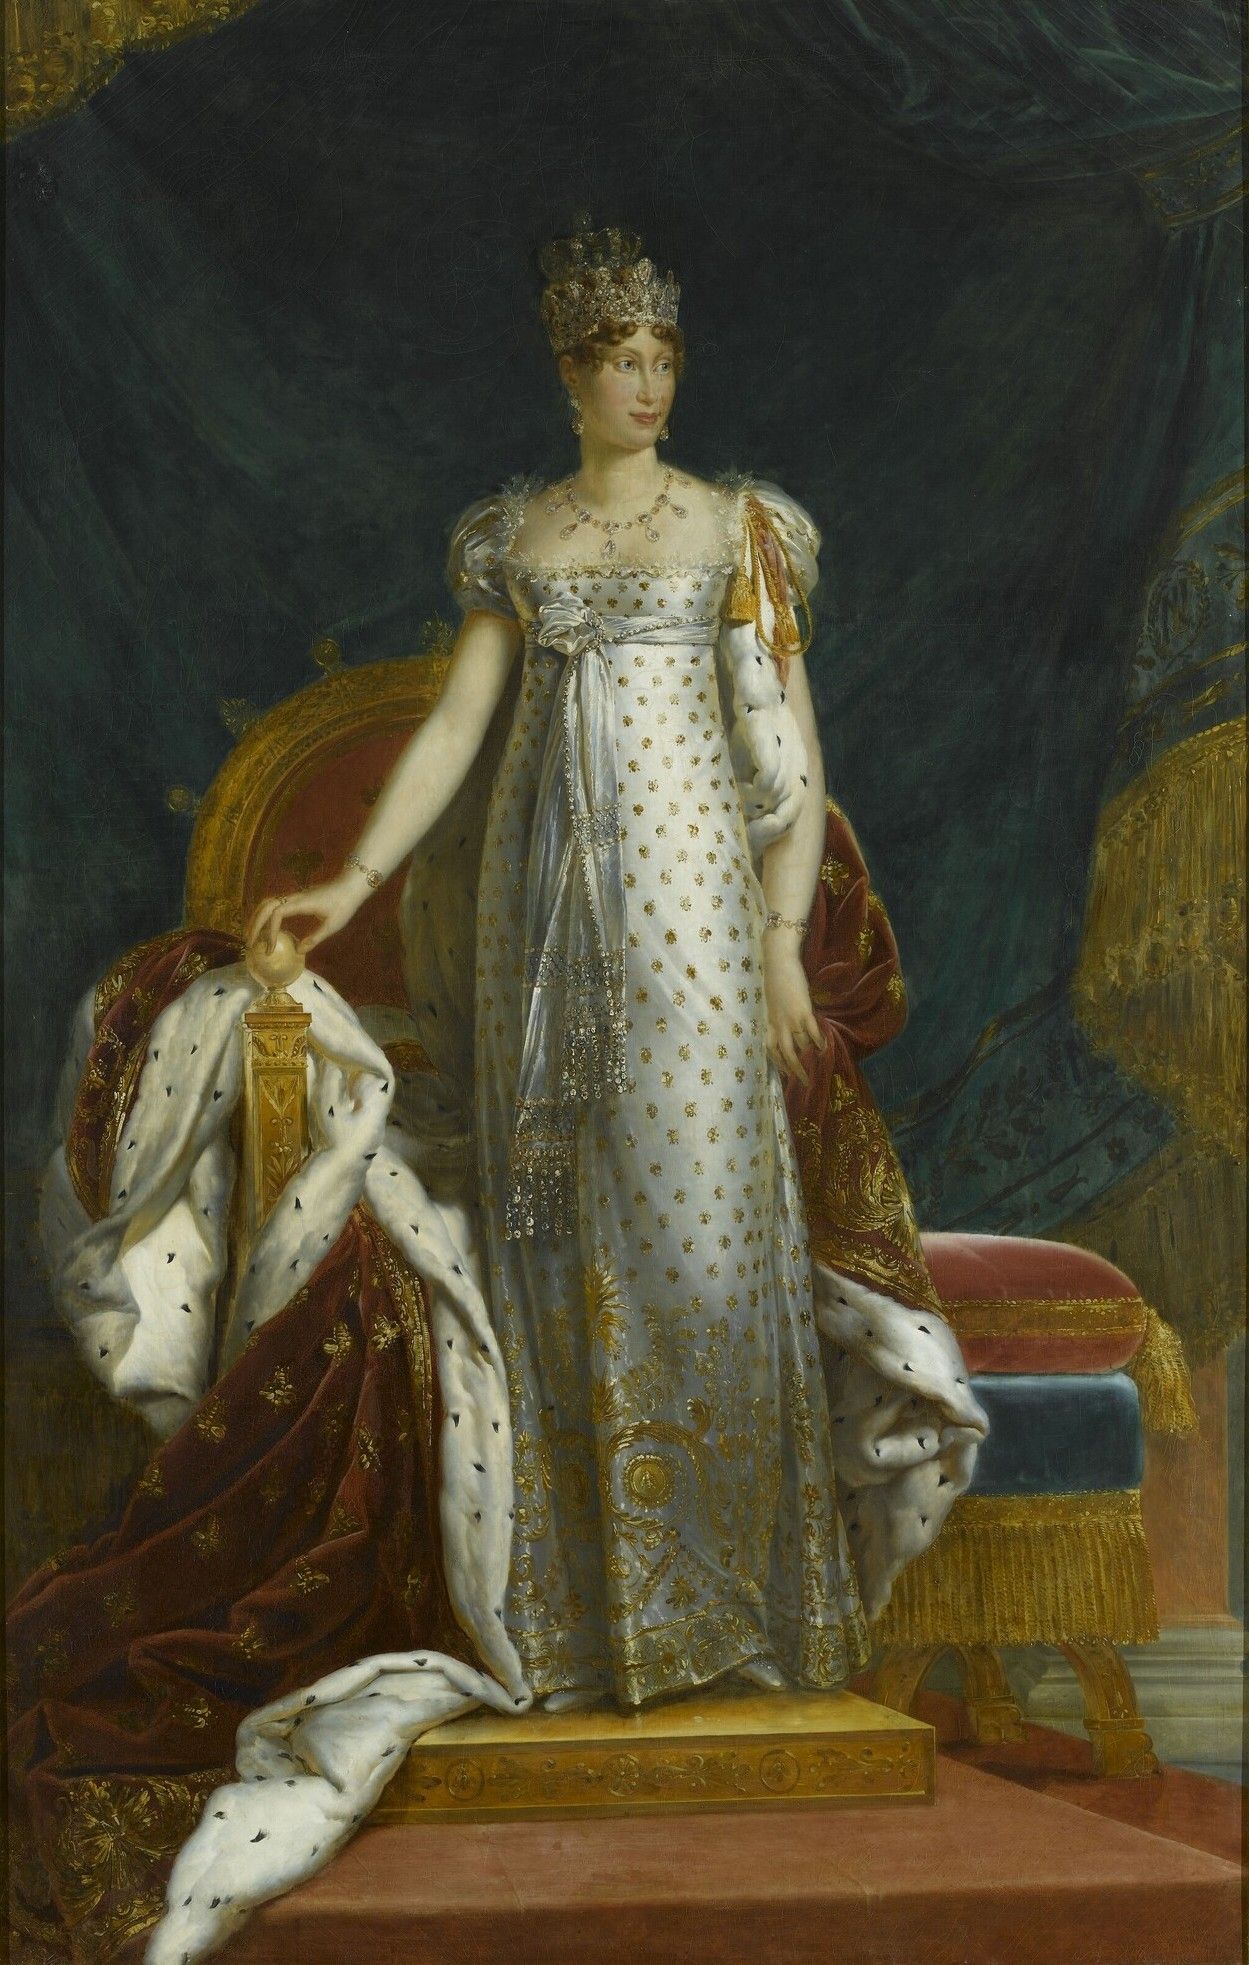 Maria Louise of Austria, Empress of France, 1812 by Francois Gerard. National Museum of the Chateau de Fontaineblue.